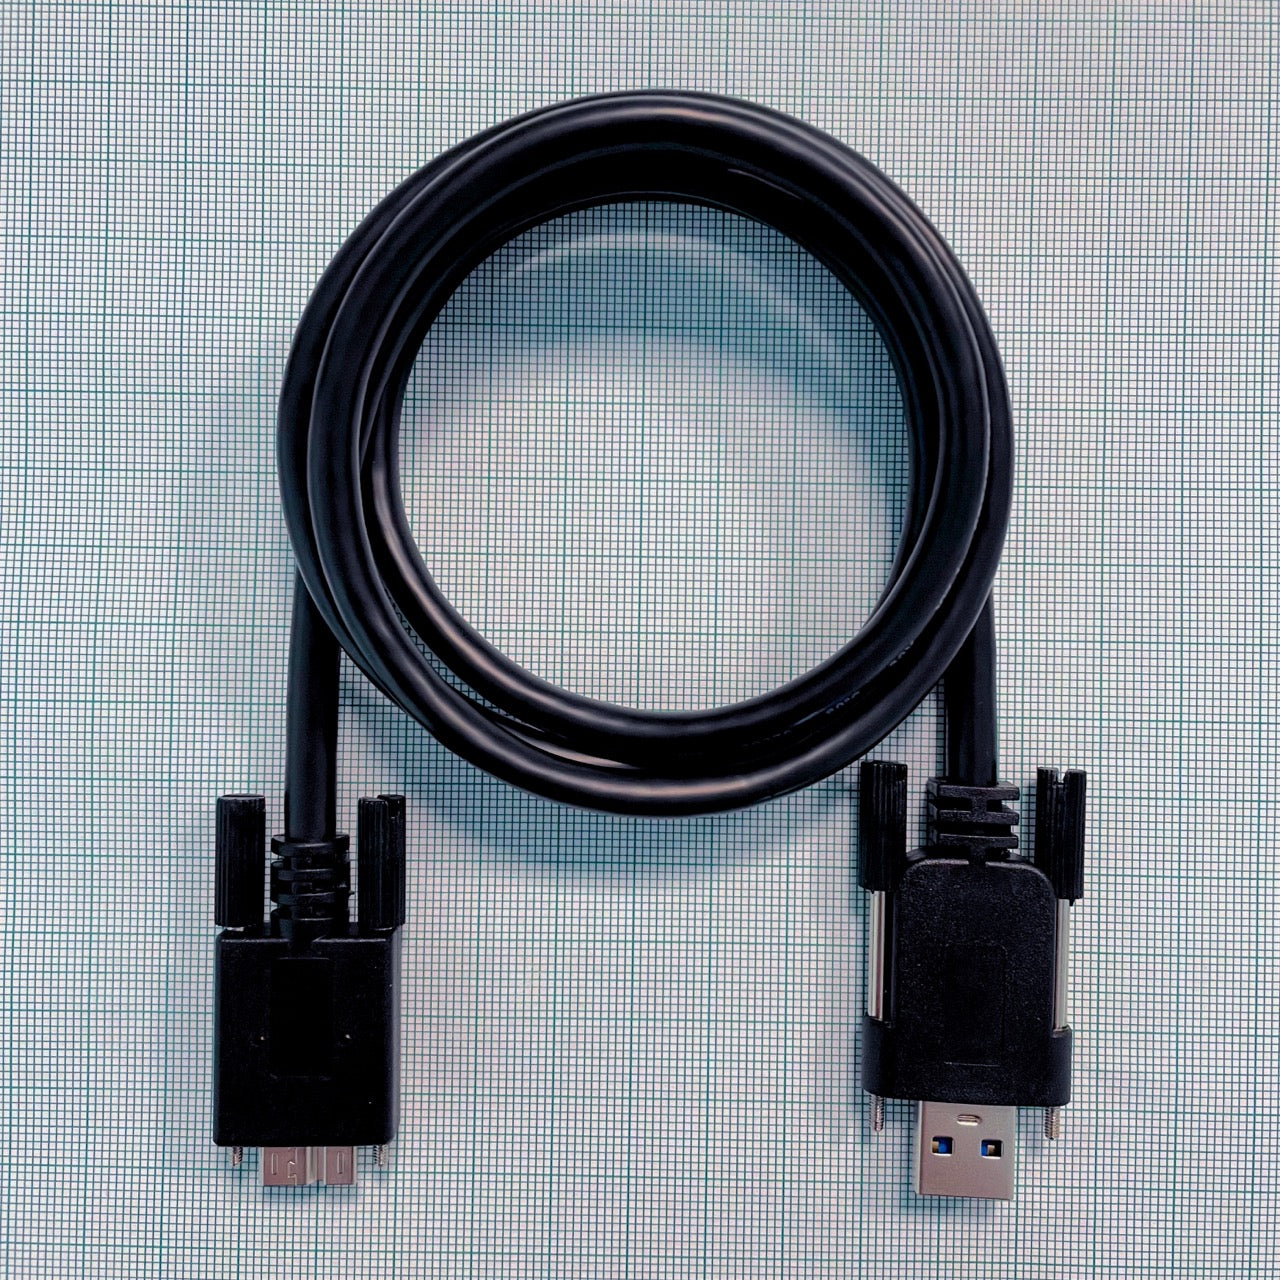 USB 3.0 5Gbps Industrial Screw Locking Cable Type A to Micro B, for connecting the MATT Robot camera to the robot